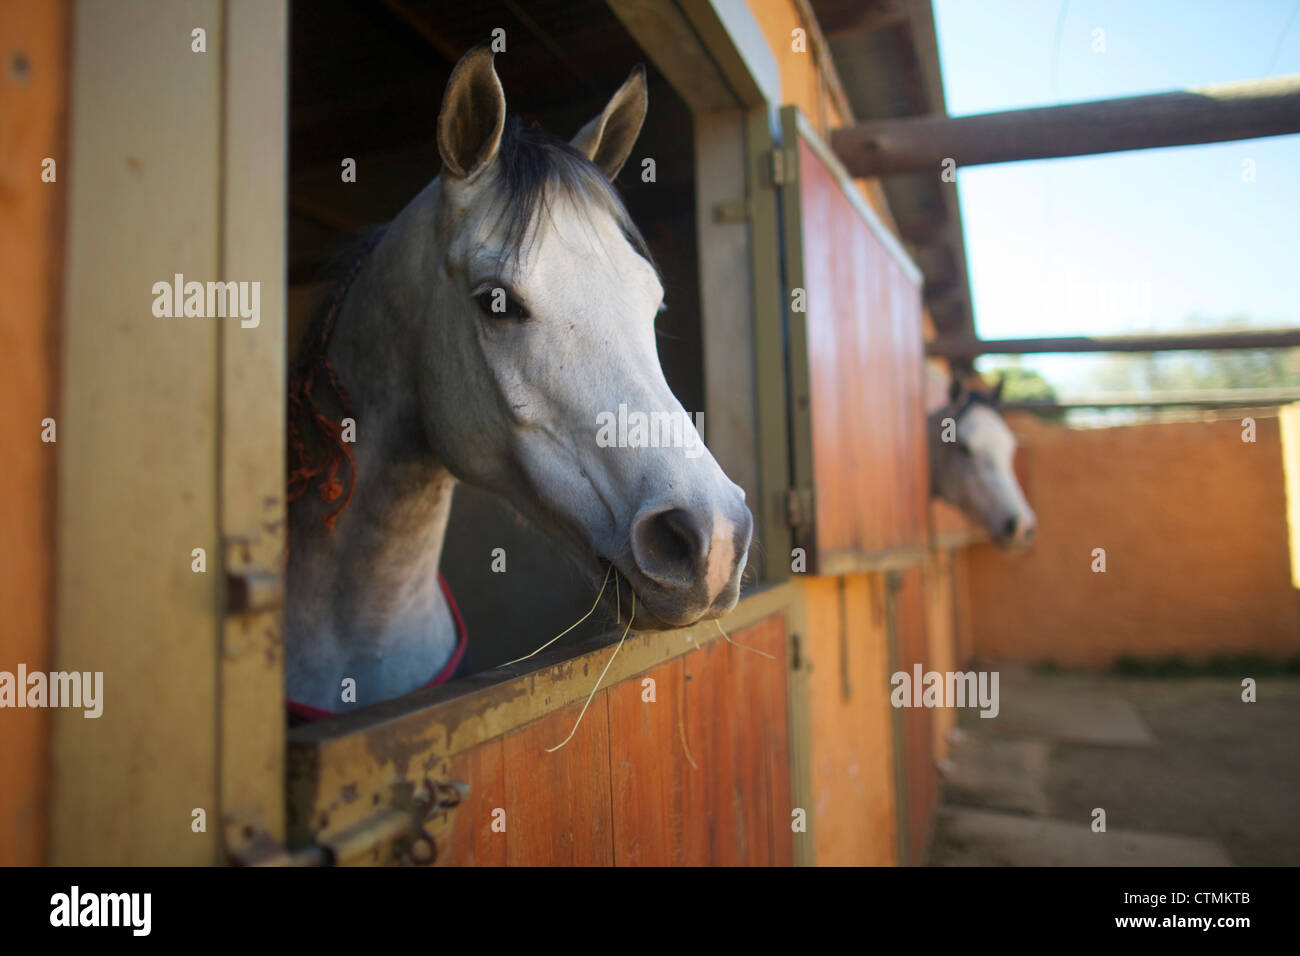 Arabian Horses in stables, Rustenburg, North West Province, South Africa Stock Photo